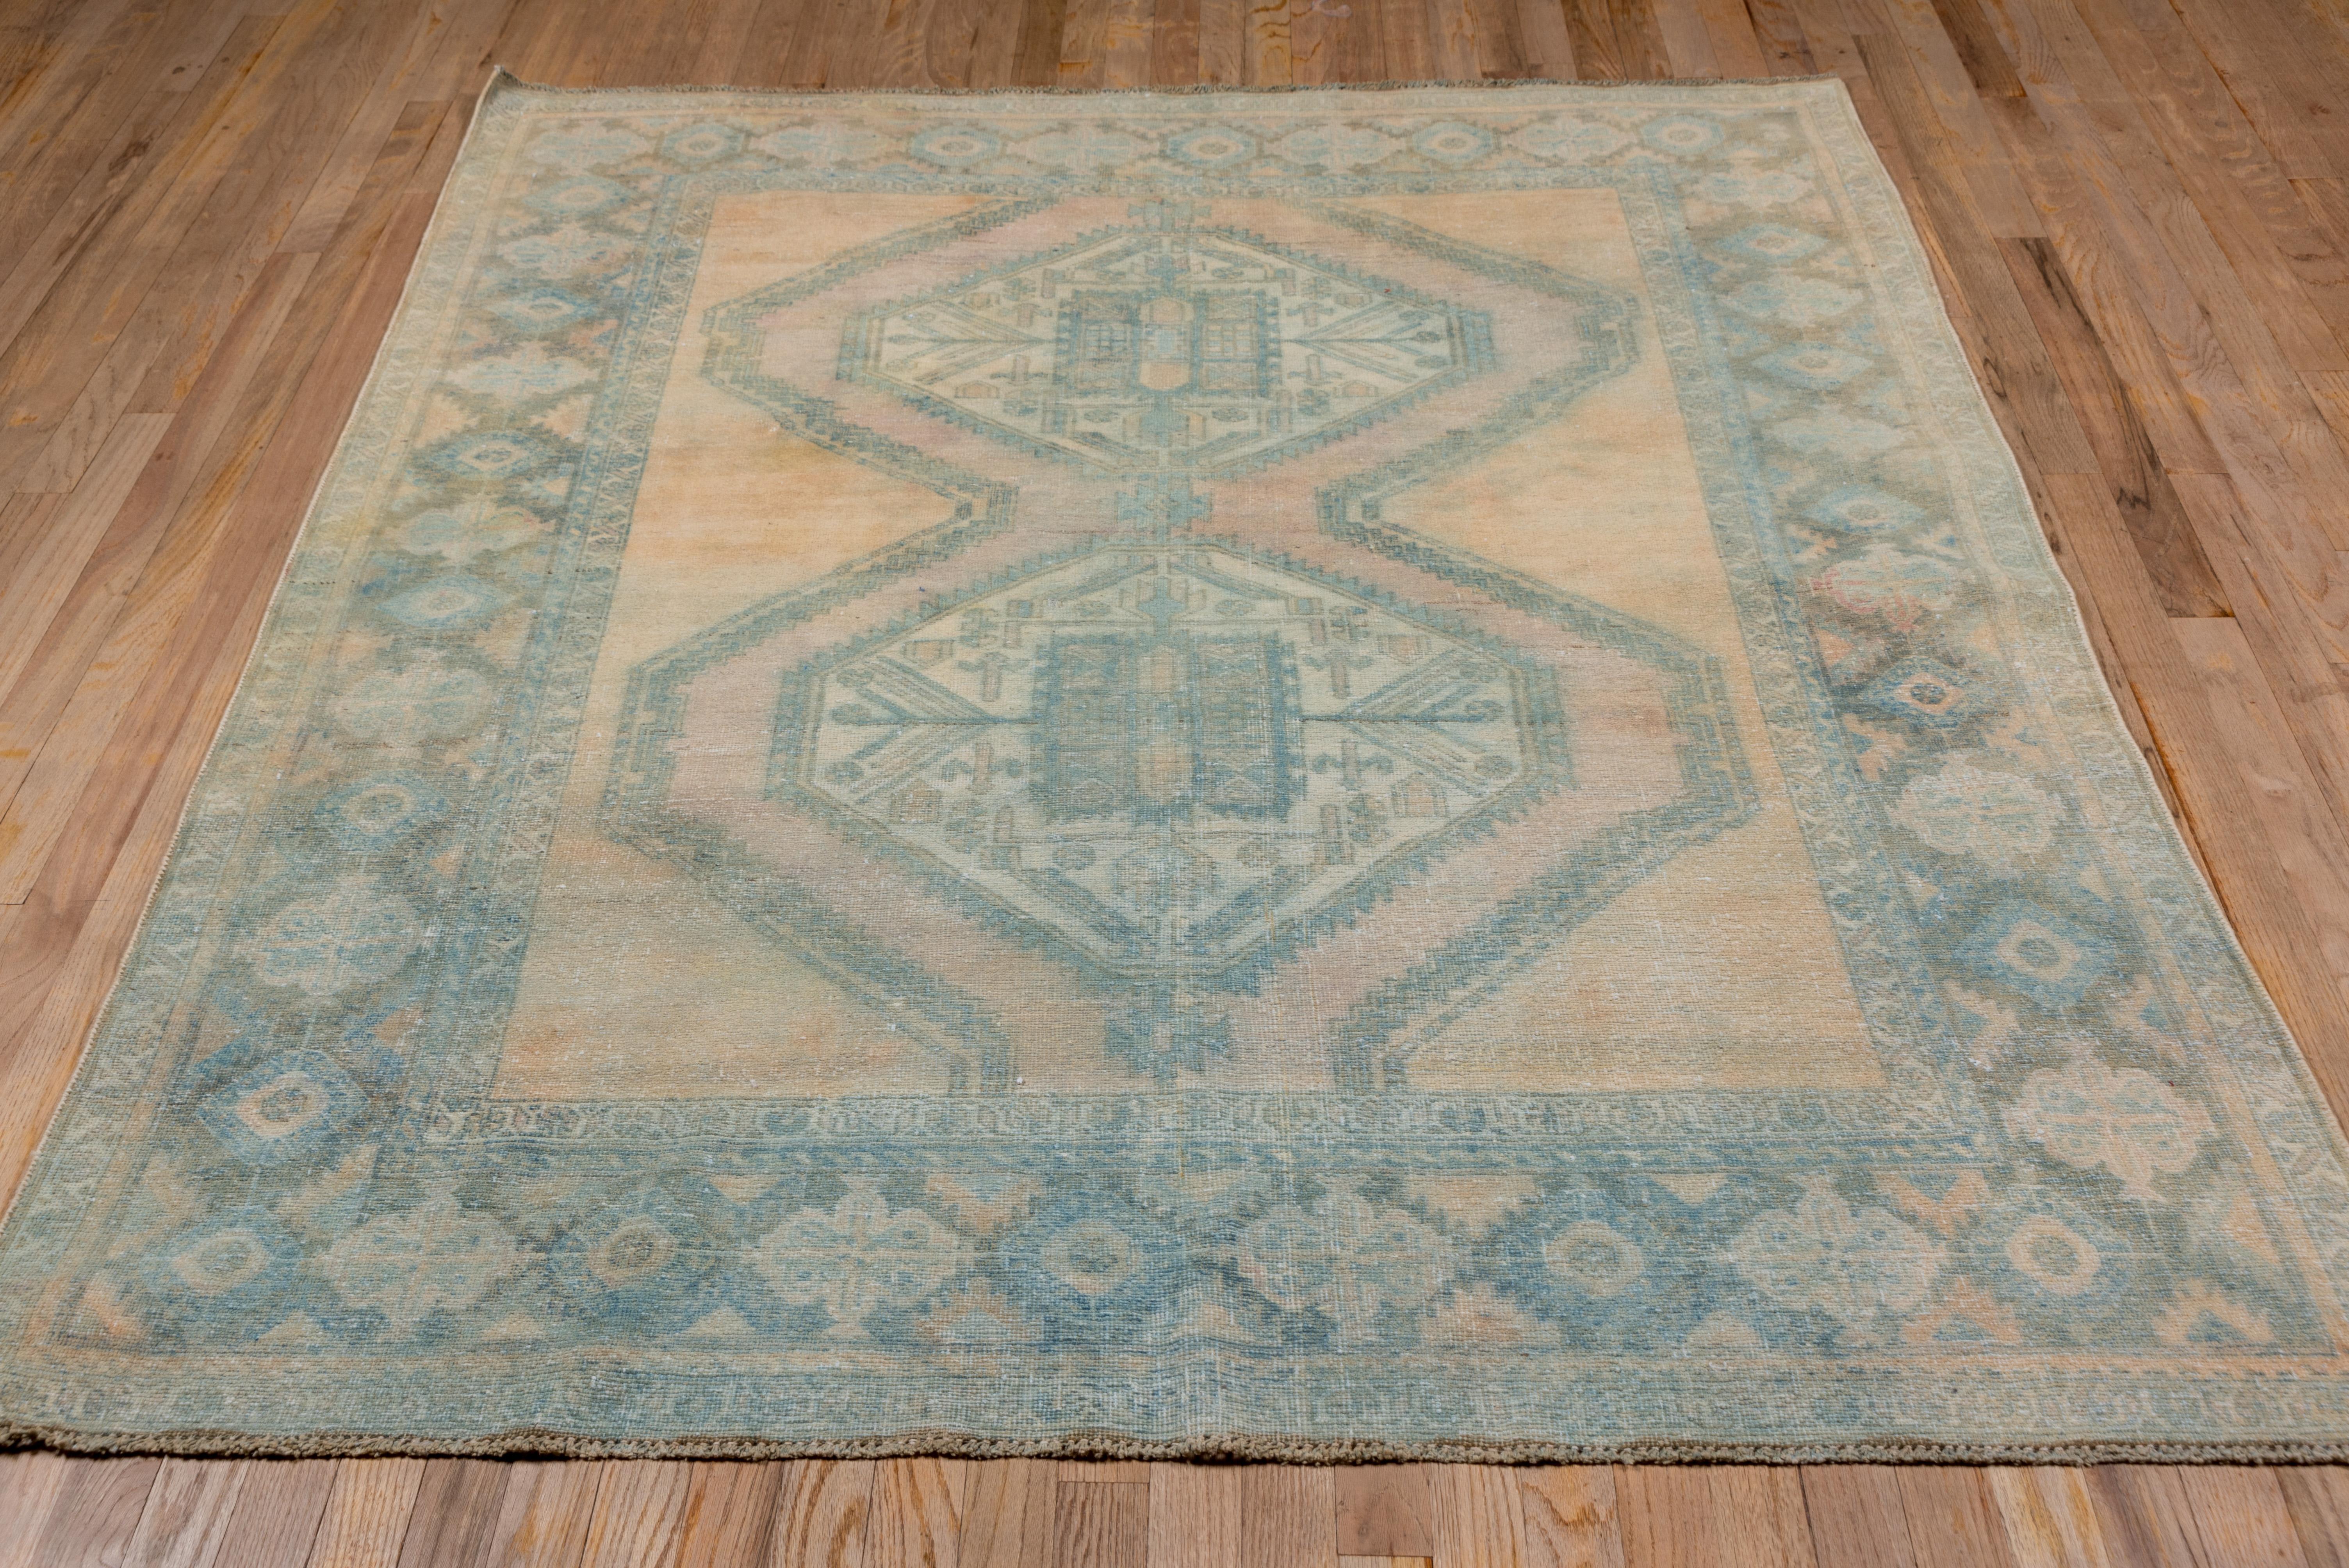 Soft Toned Tribal Persian Afshar Rug, Blue & Beige Palette In Good Condition For Sale In New York, NY